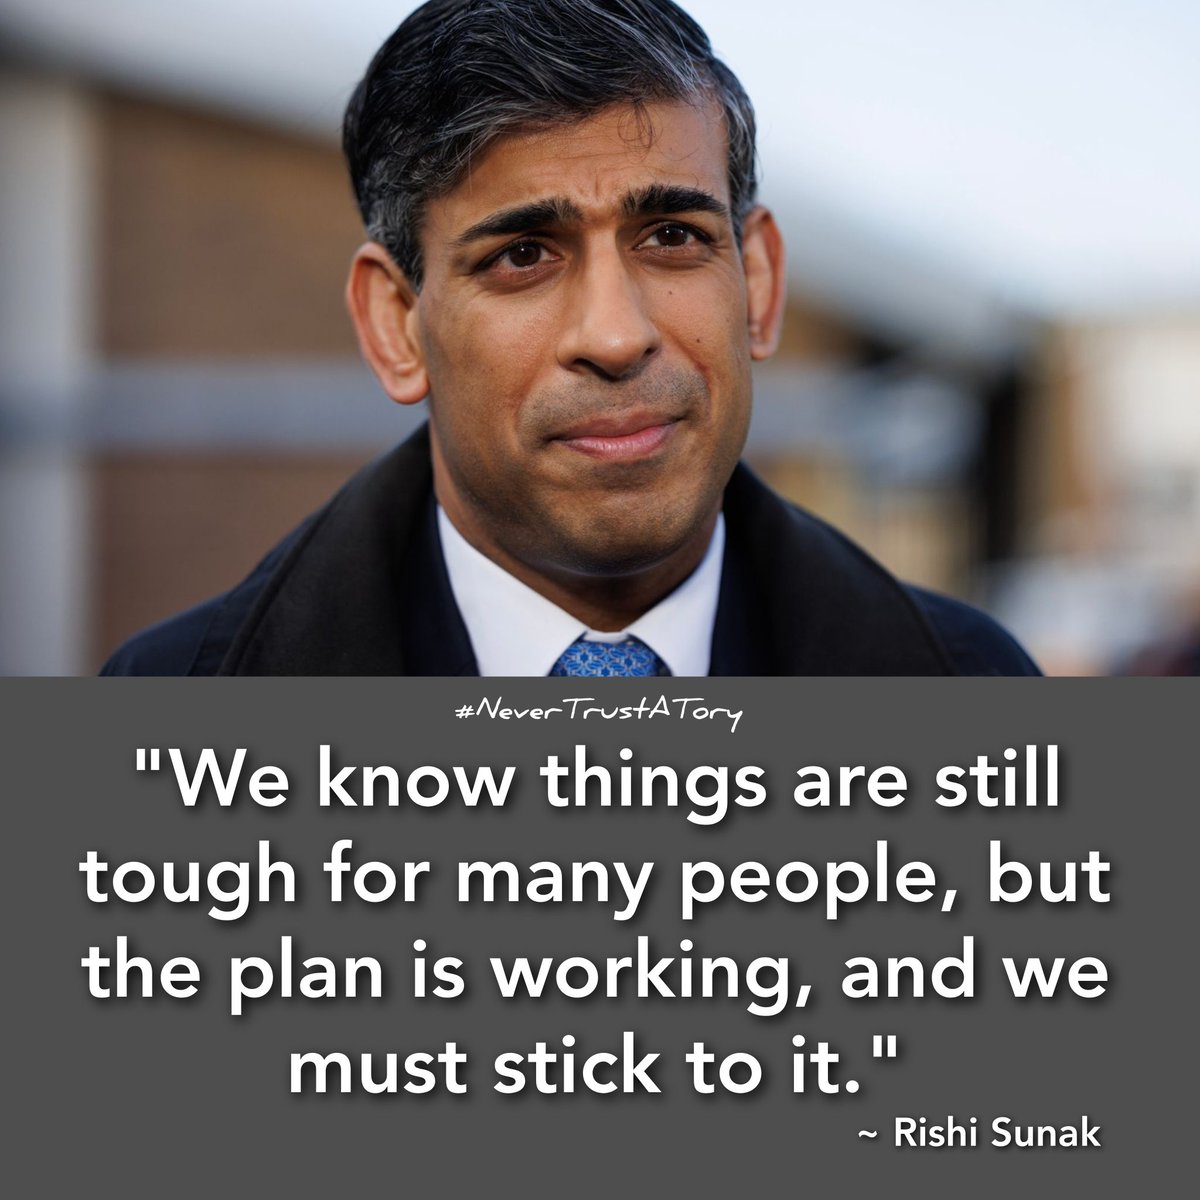 🚨 He 'knows' things are still tough, as the economy 'turns a corner'.

No @RishiSunak, YOU haven't got a f*cking clue!! YOU have no idea how tough things get for real people! 

#NeverTrustATory #ToryChaos 
#ToryIncompetence #ToryLies 
#GeneralElectionN0W